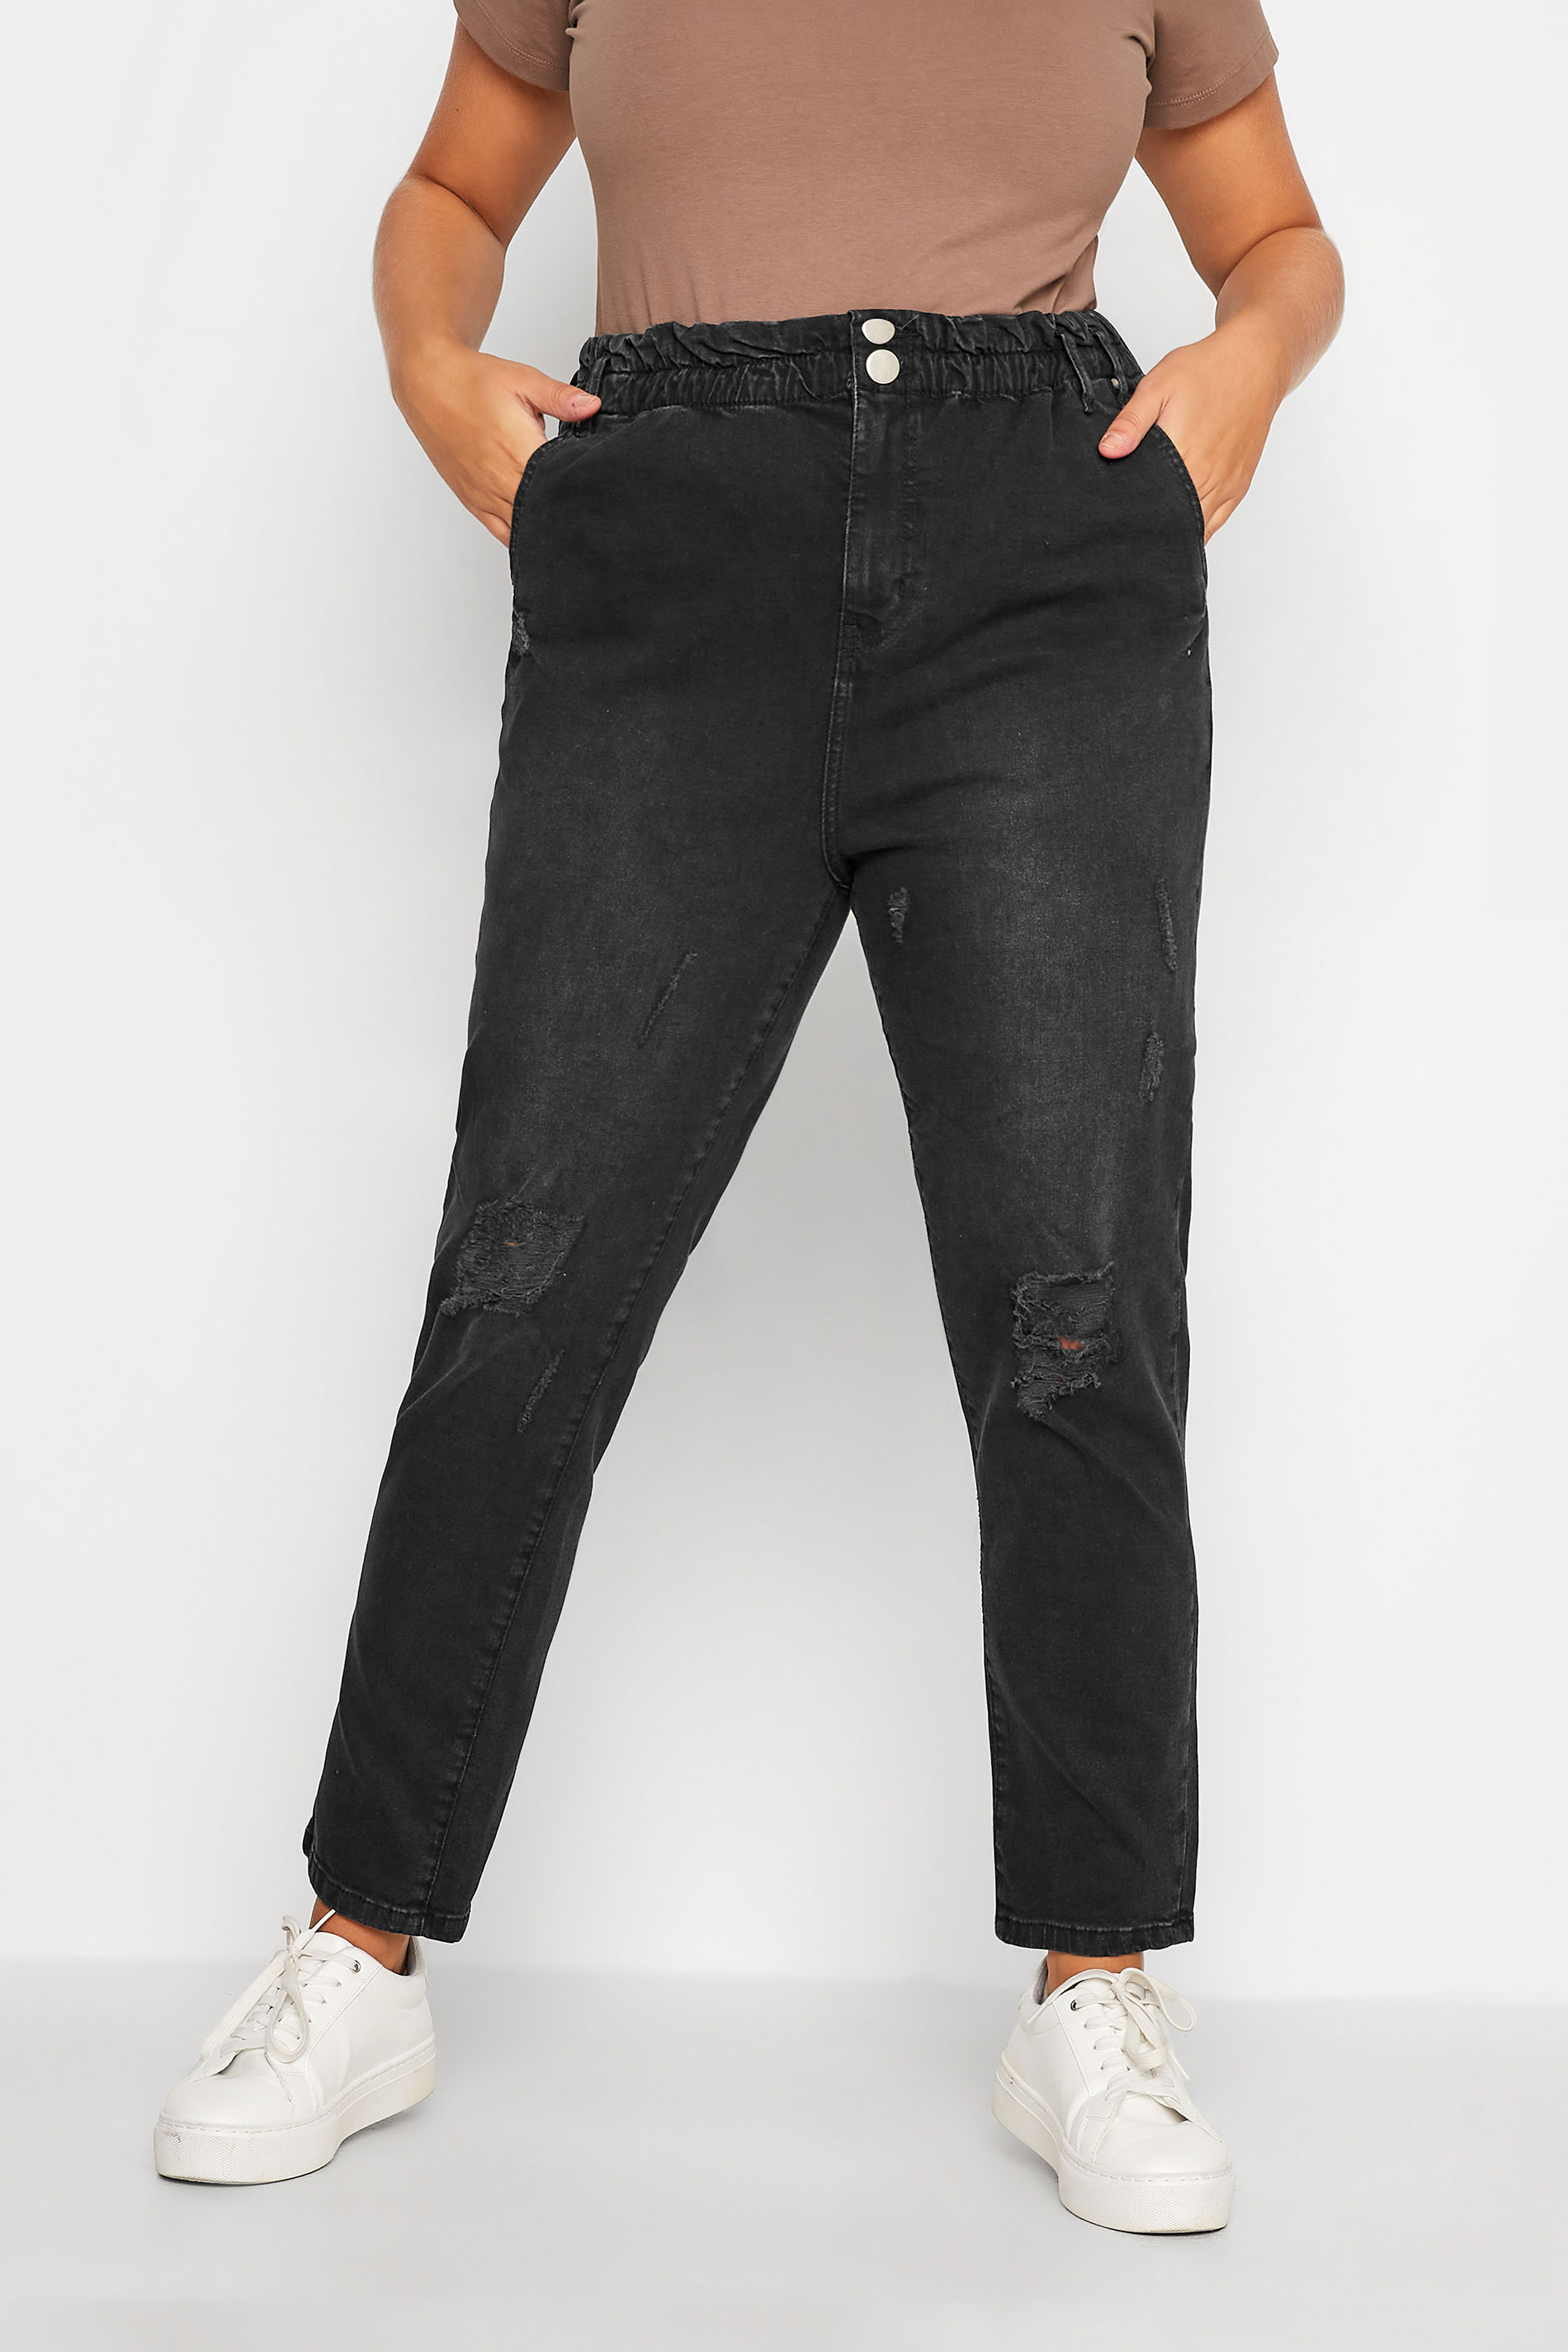 Plus Size Black Ripped Elasticated MOM Jeans | Yours Clothing 2